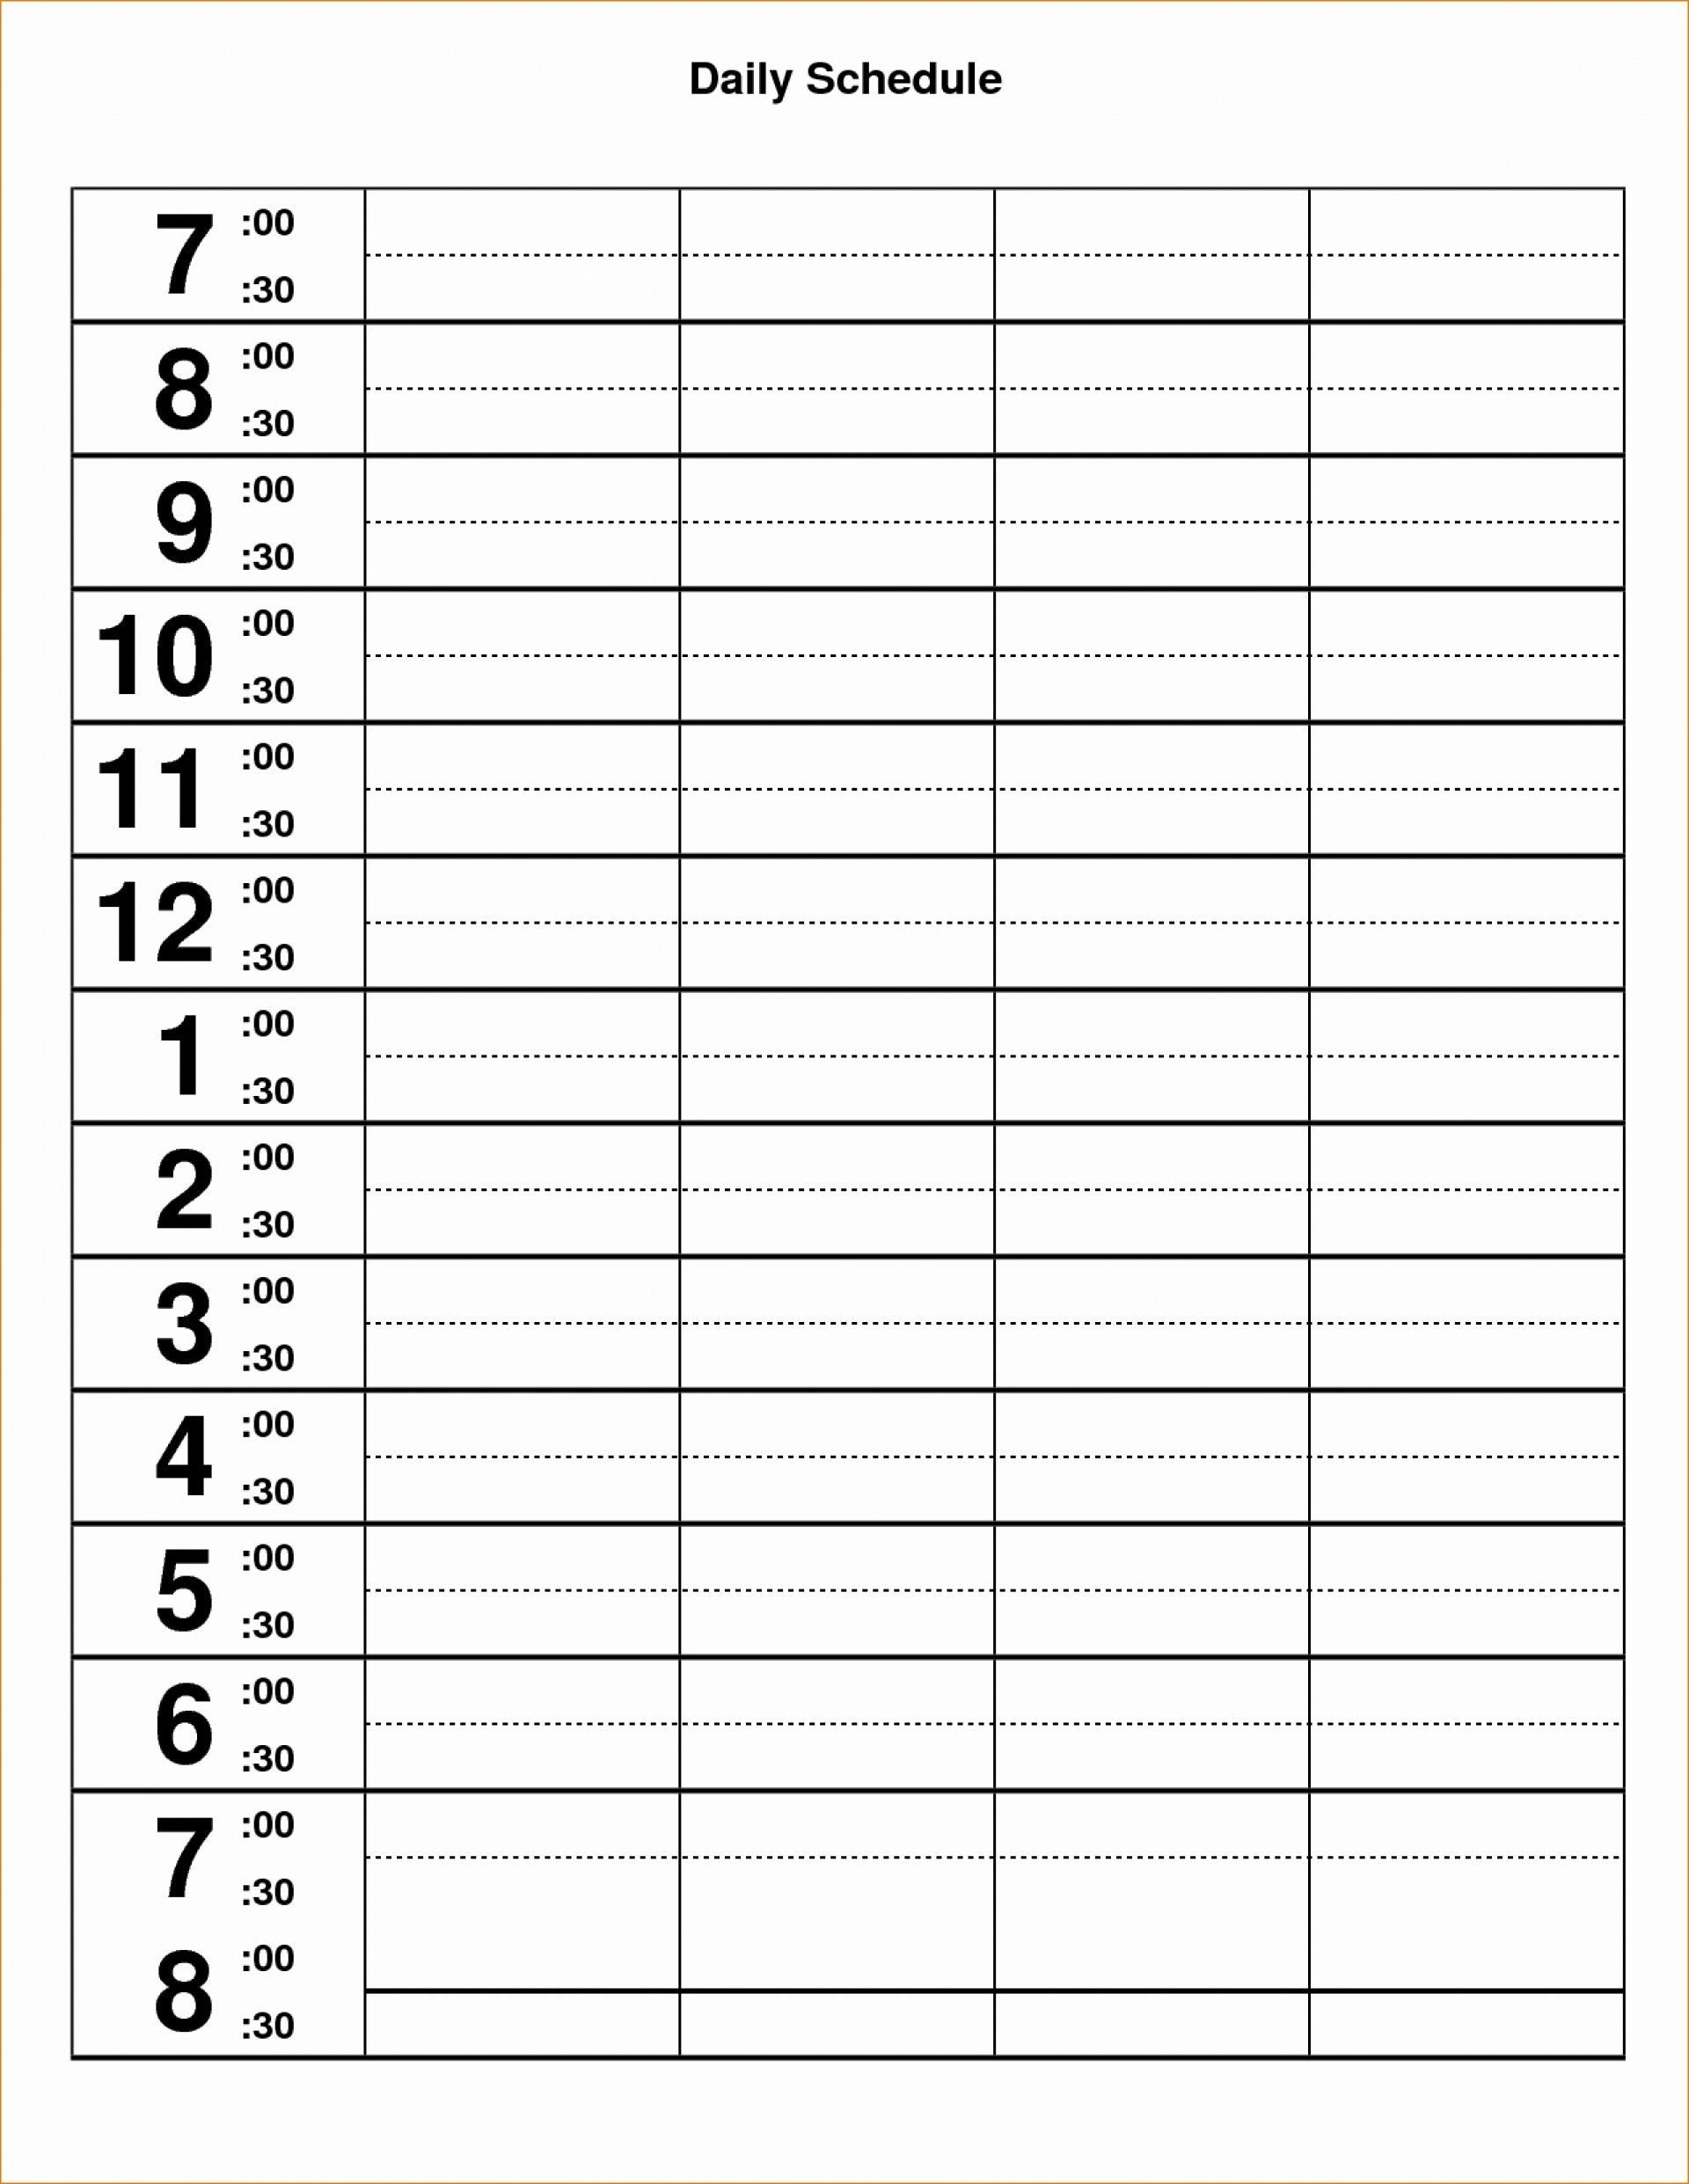 incredible 30 minute increment schedule template excel in